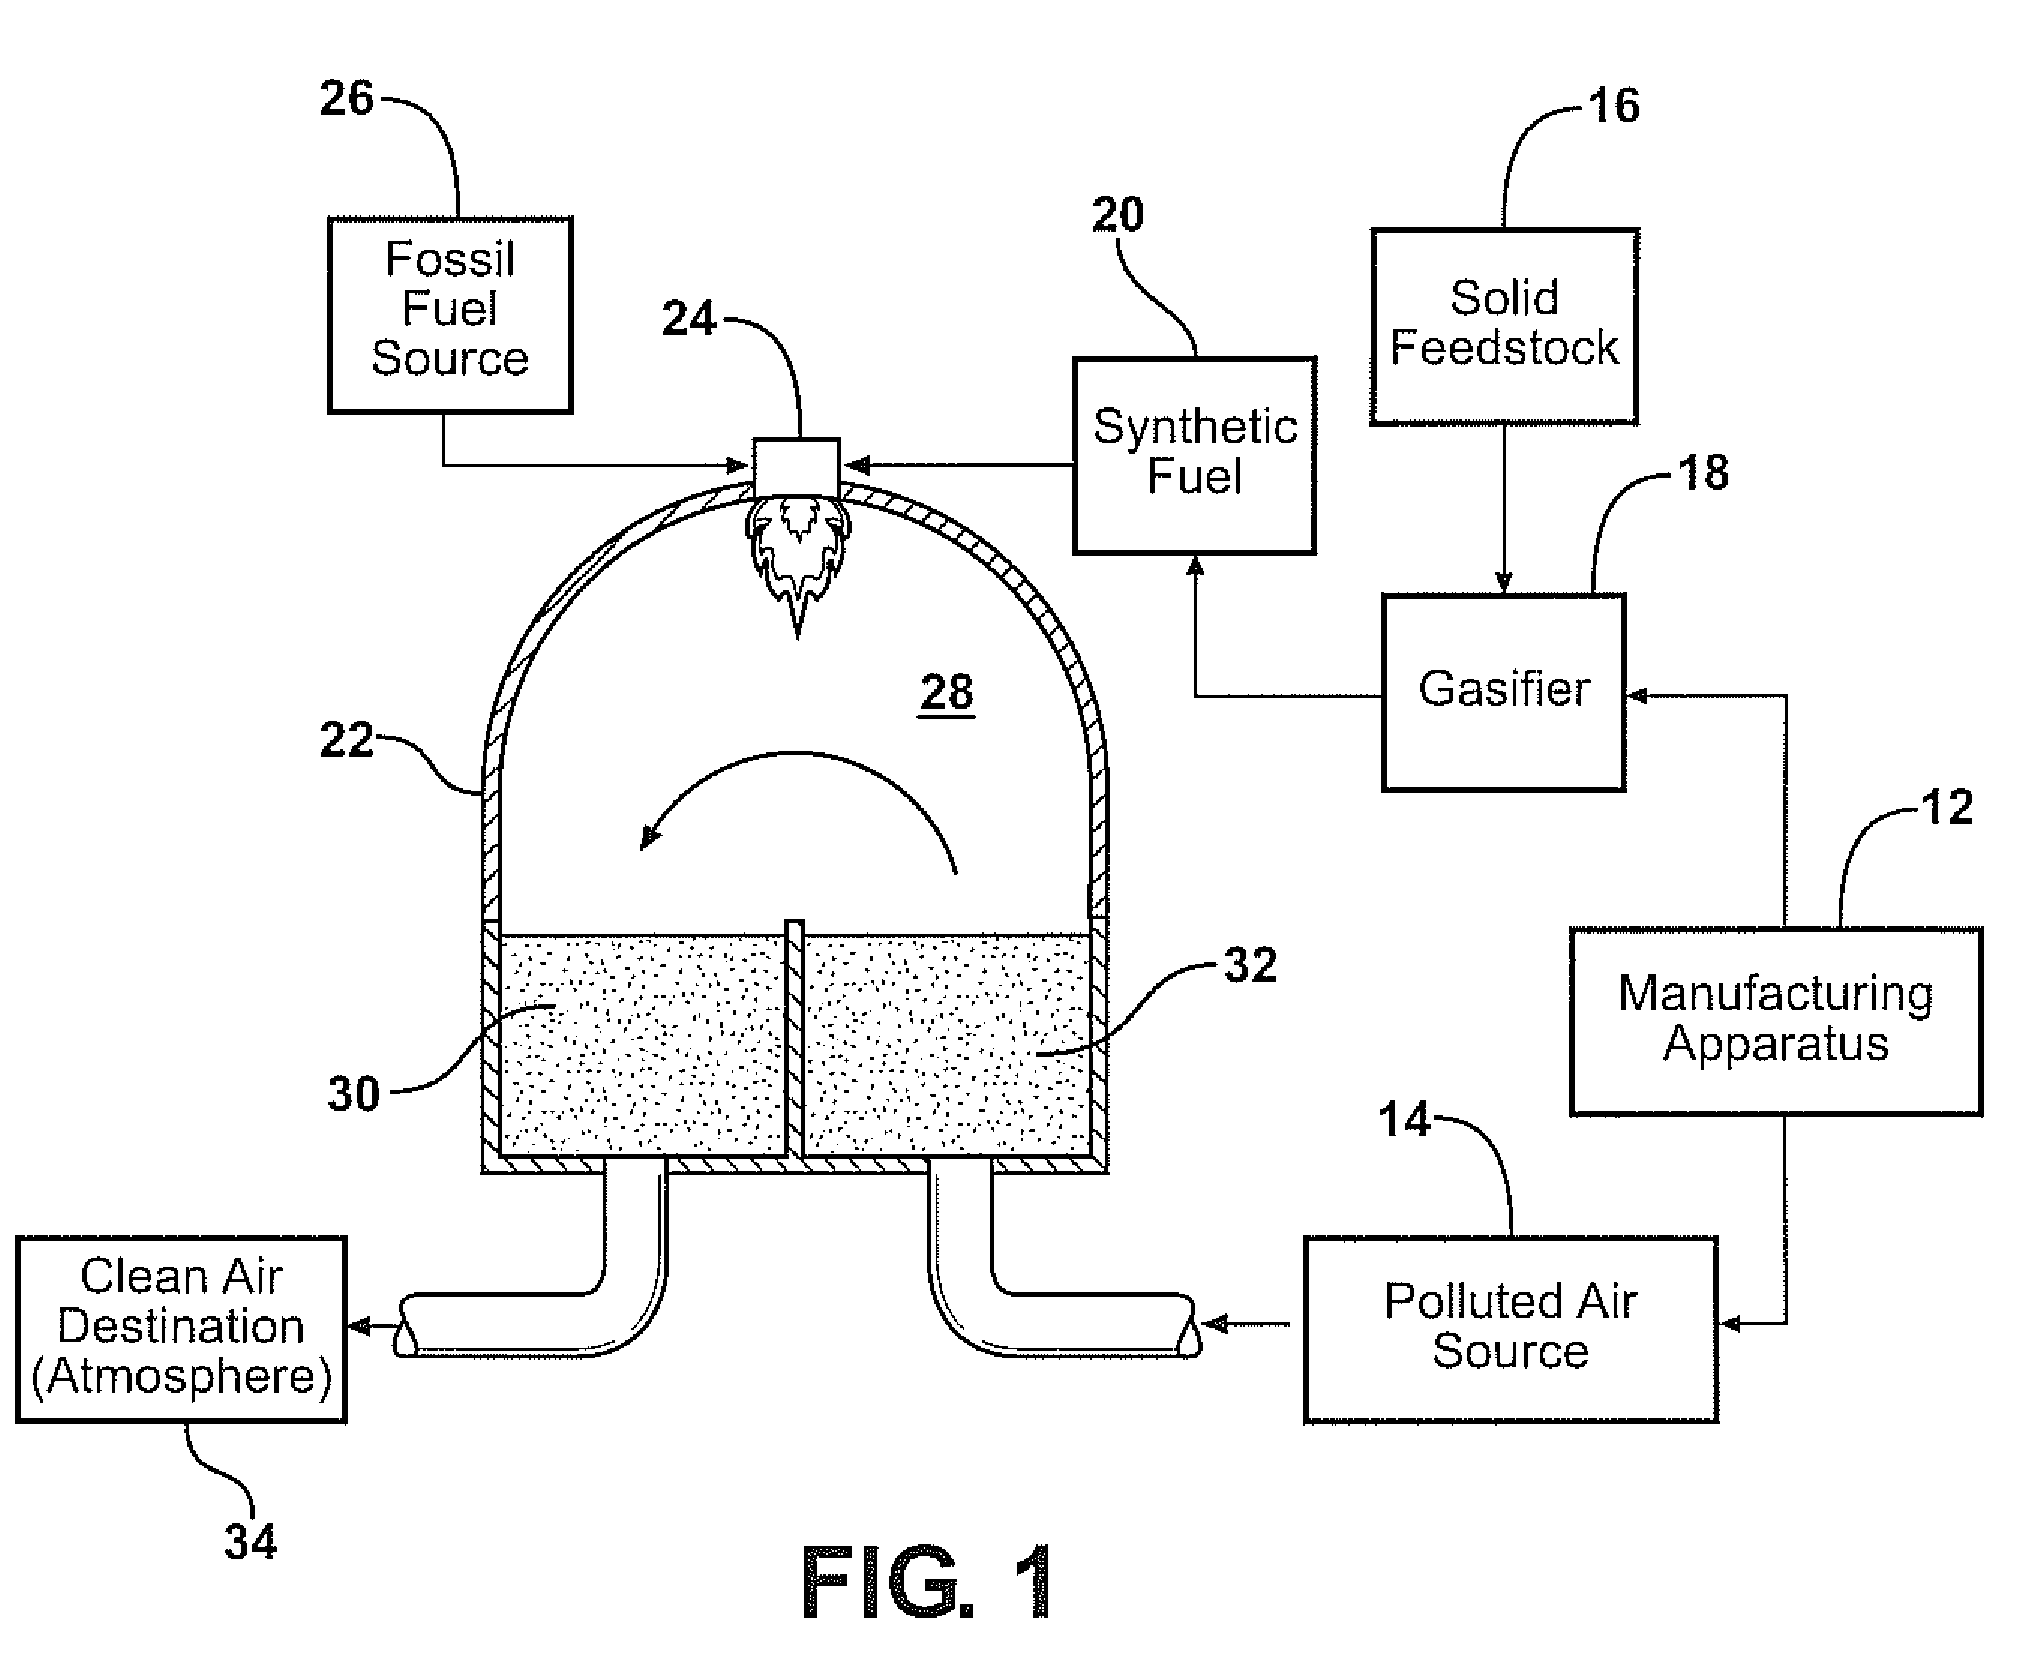 Thermal oxidizer with gasifier